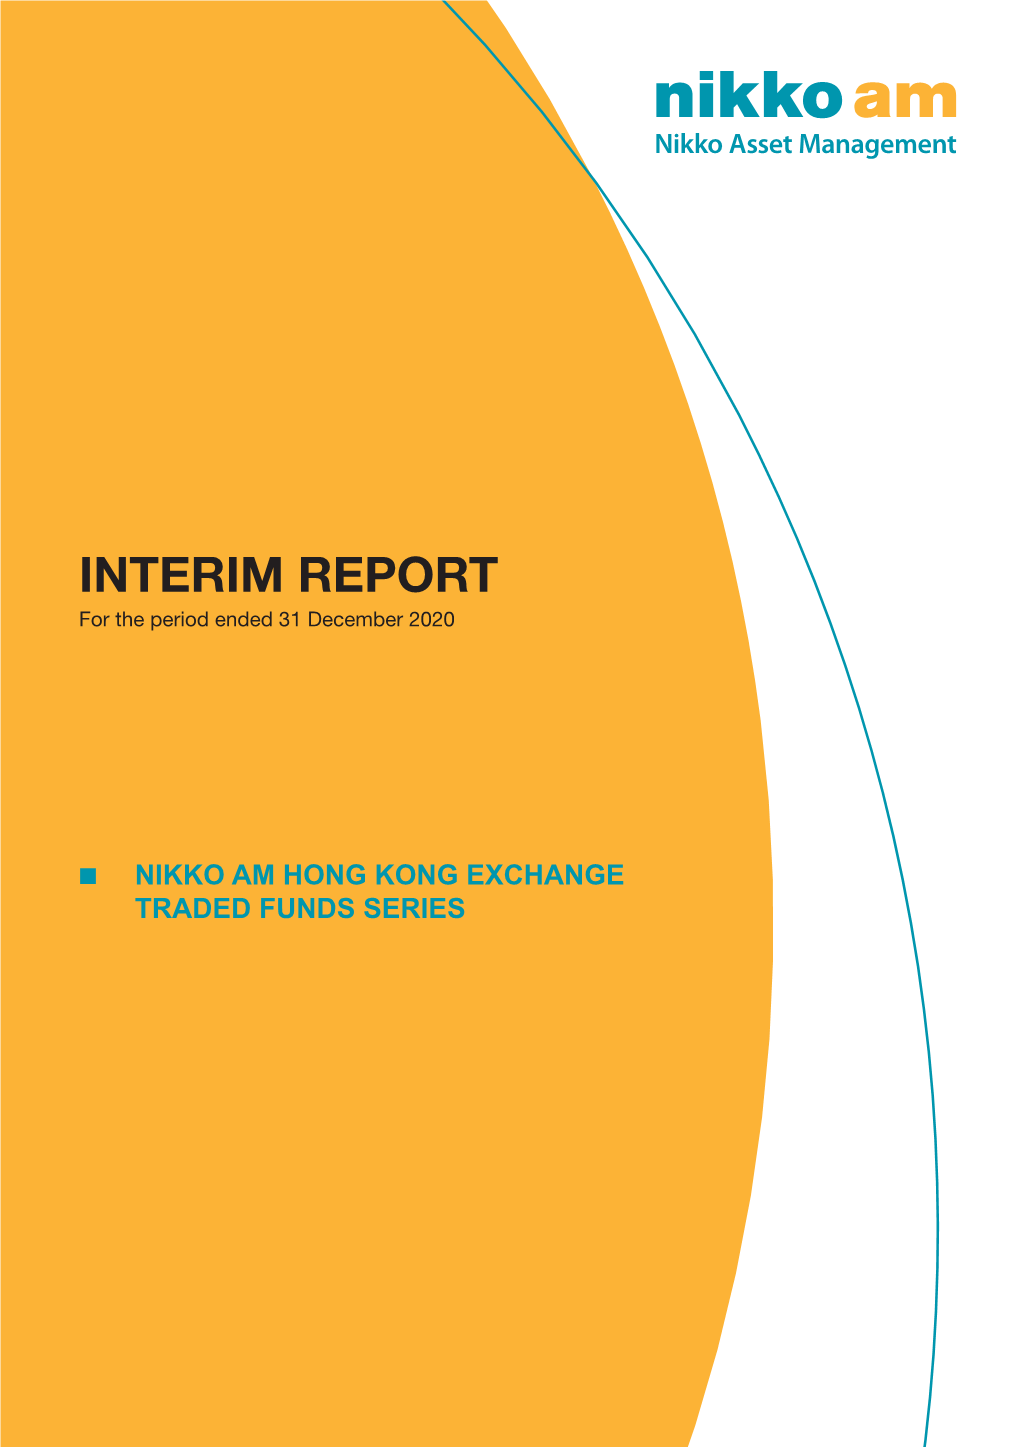 INTERIM REPORT for the Period Ended 31 December 2020